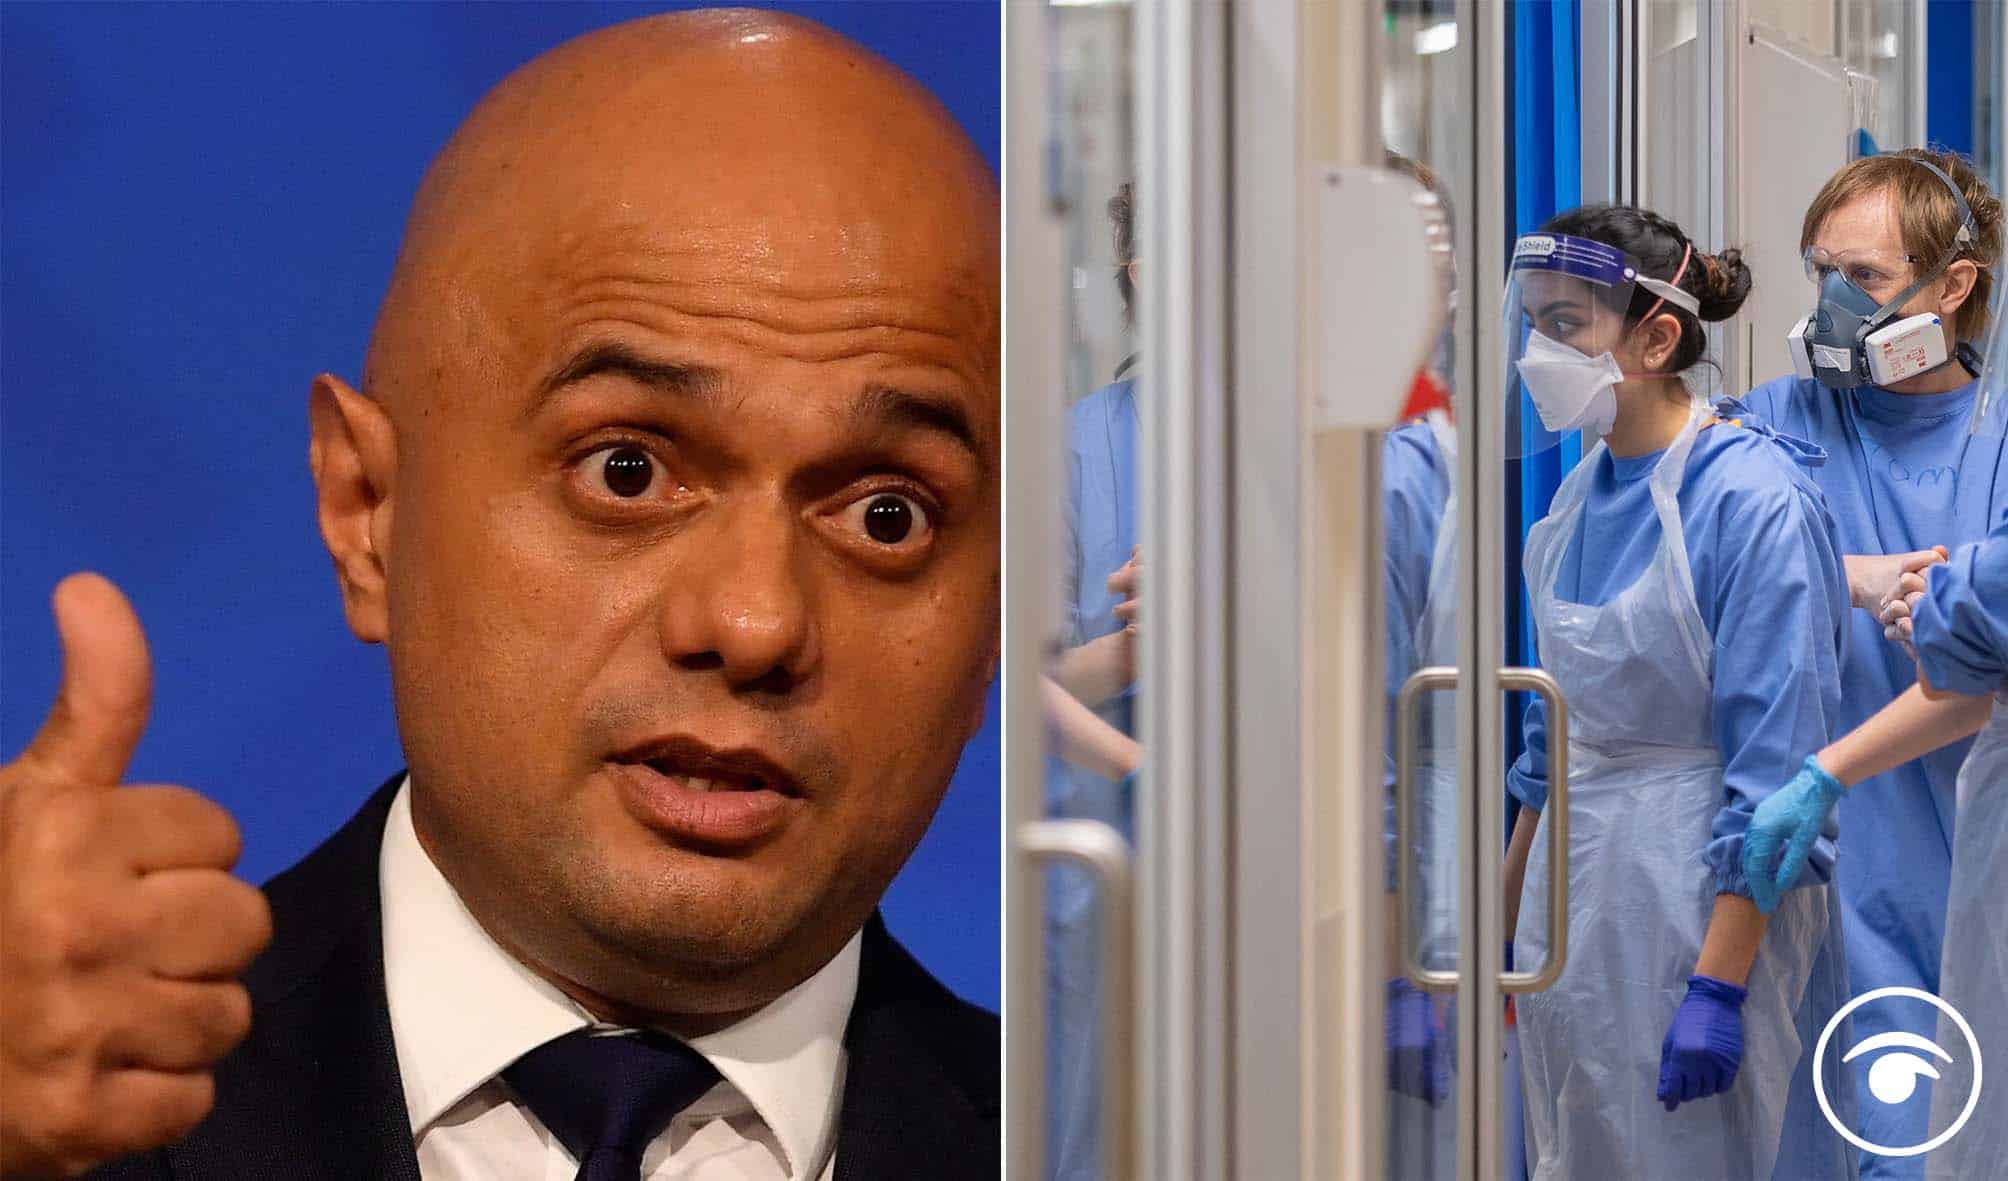 ‘Clear conflict of interest’: Javid’s share options in health tech firm under scrutiny